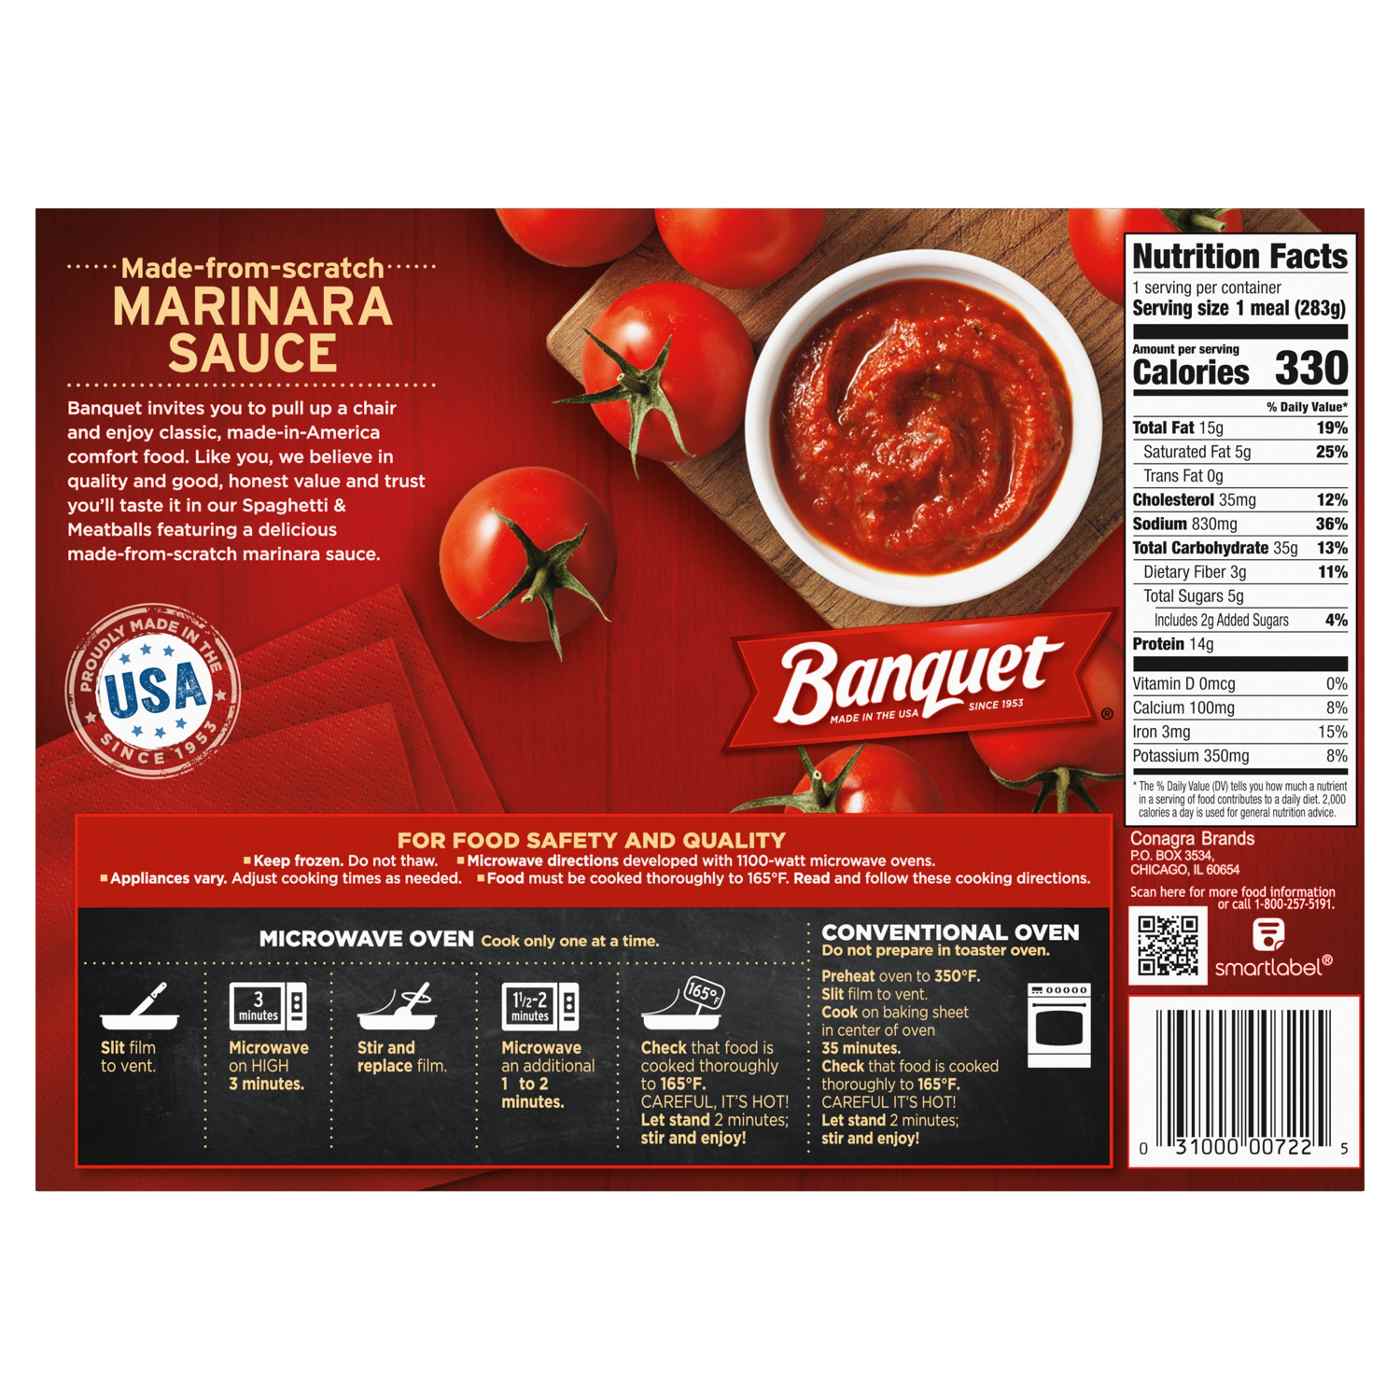 Banquet Spaghetti & Meatballs Frozen Meal; image 4 of 5